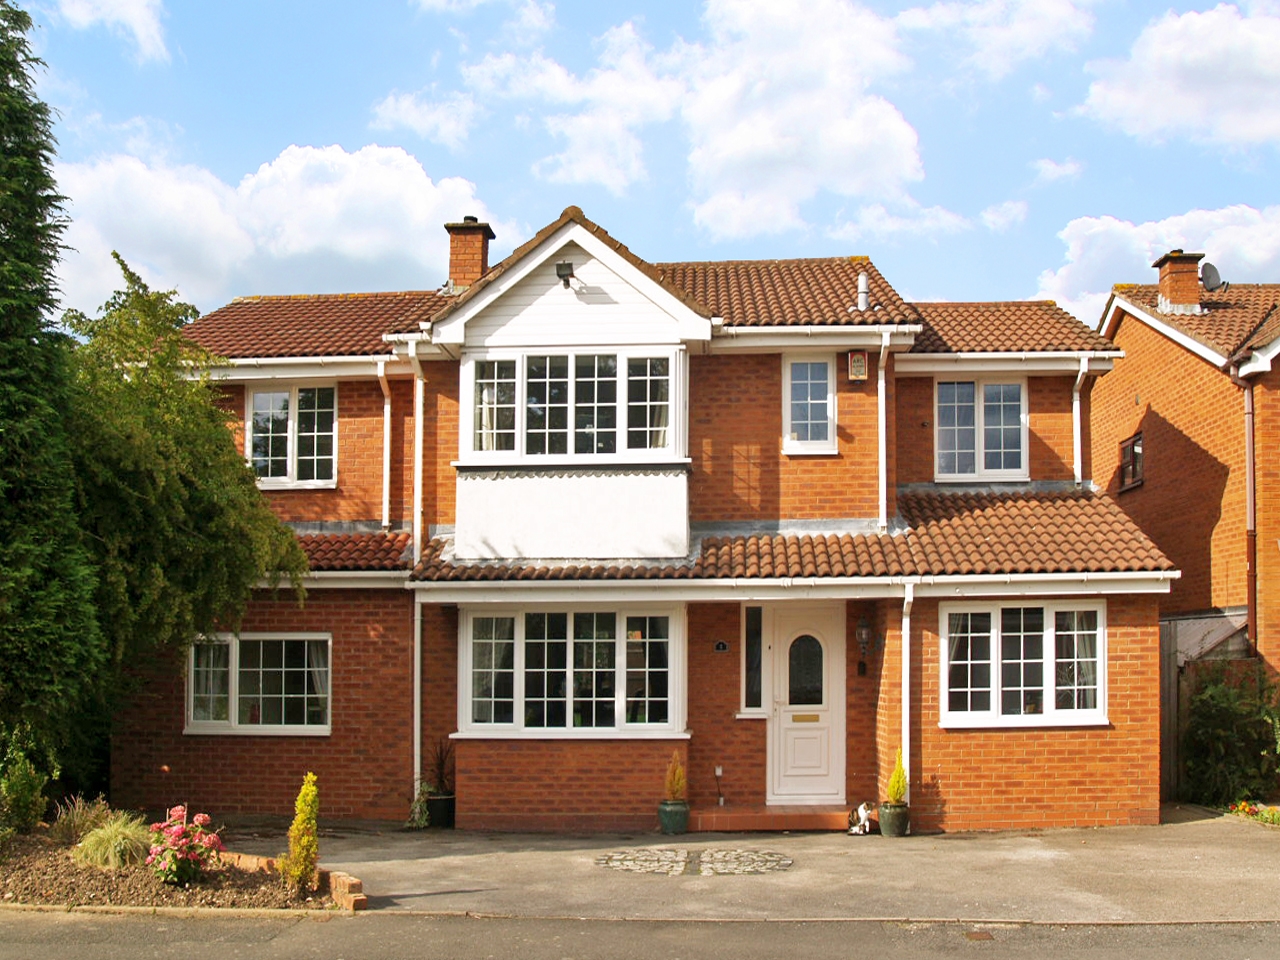 5 bedroom detached house SSTC in Solihull - Main Image.